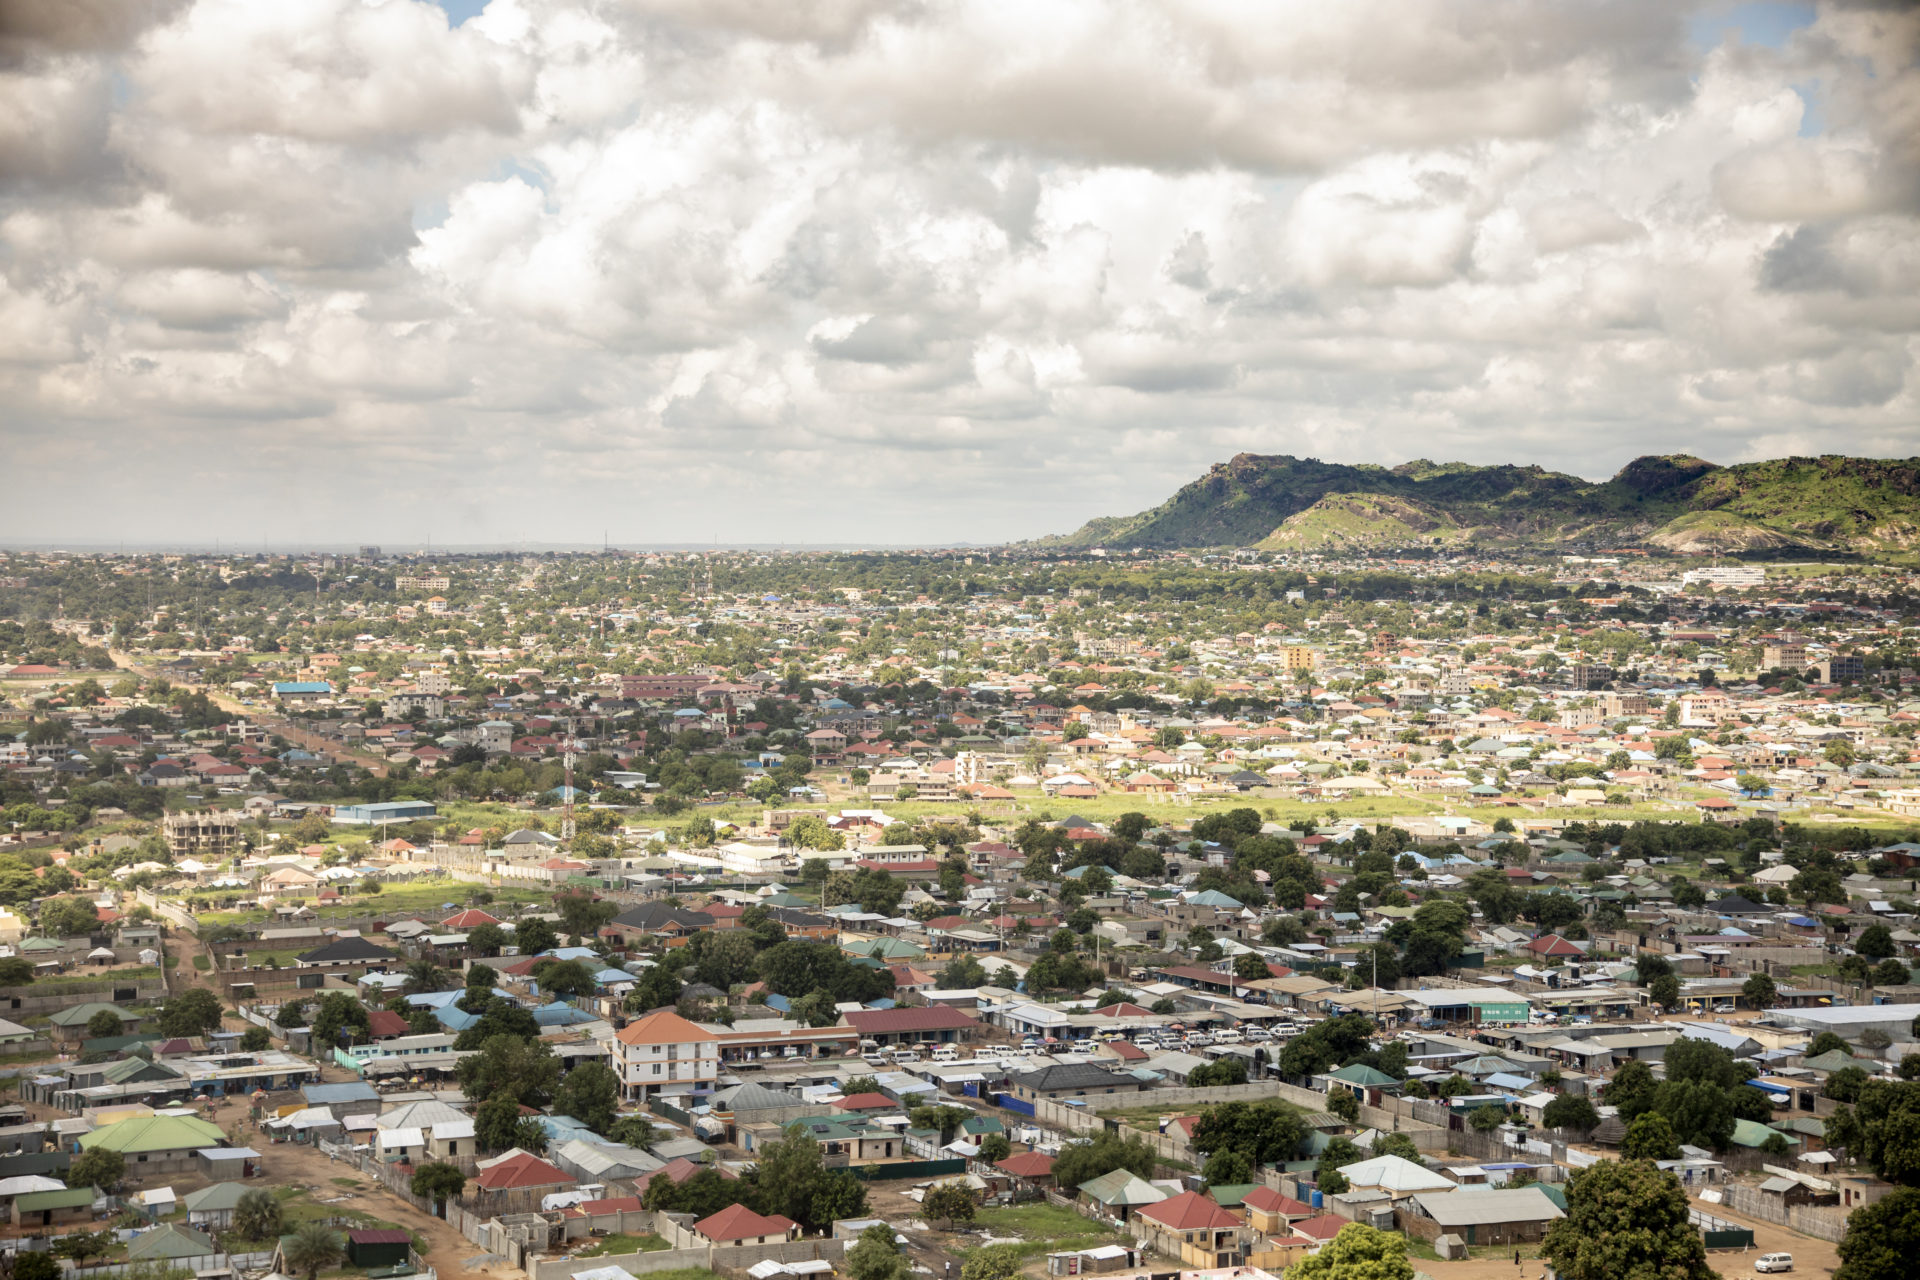 Aerial View Of Juba, South Sudan With Jebel Kujur In The Background